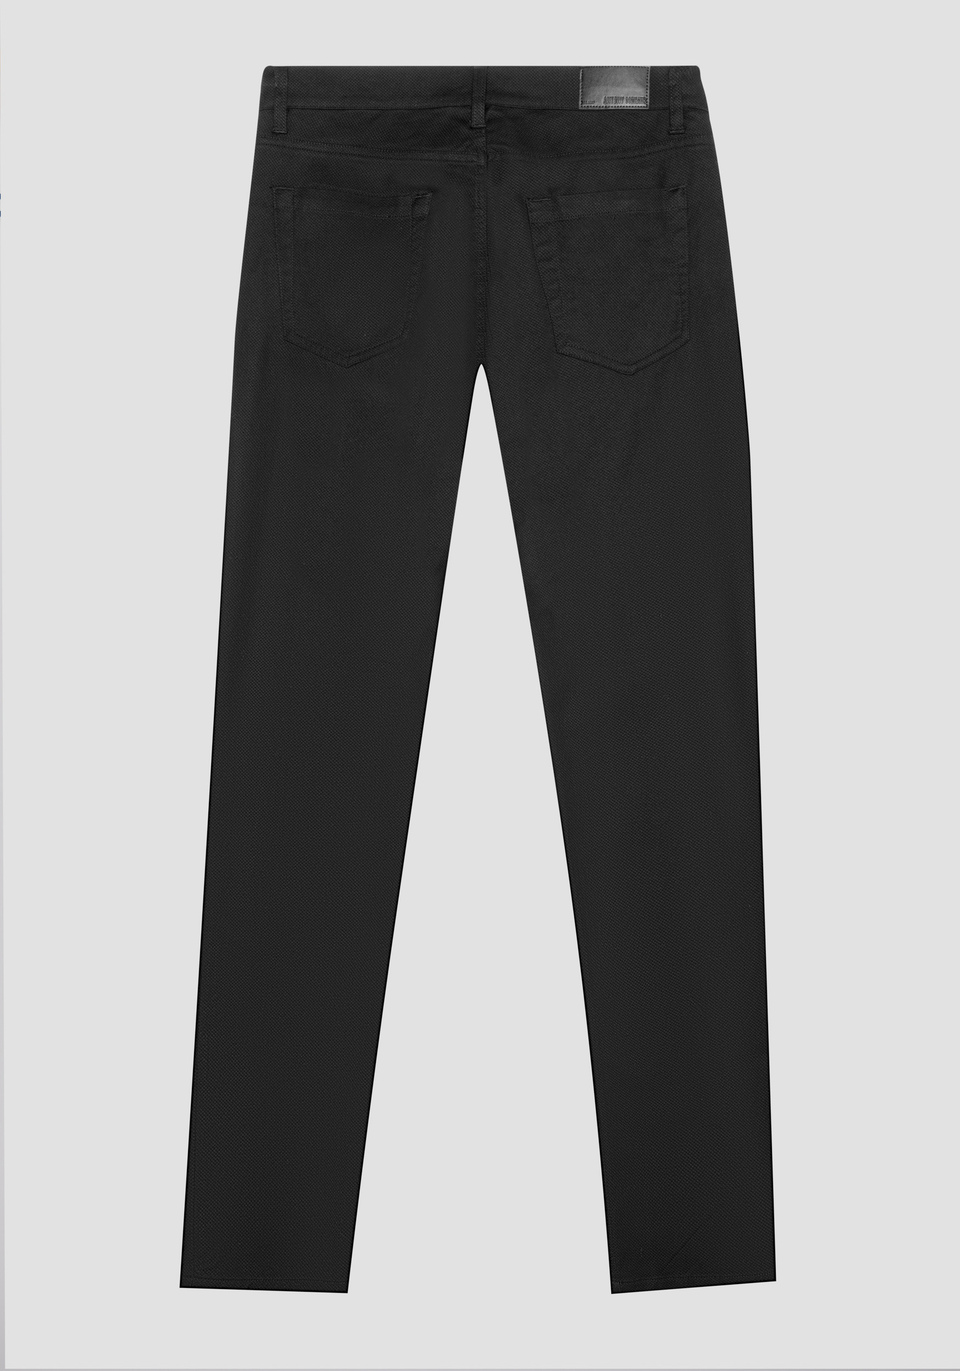 “BARRET” SKINNY-FIT TROUSERS IN STRETCH WOVEN COTTON - Antony Morato Online Shop